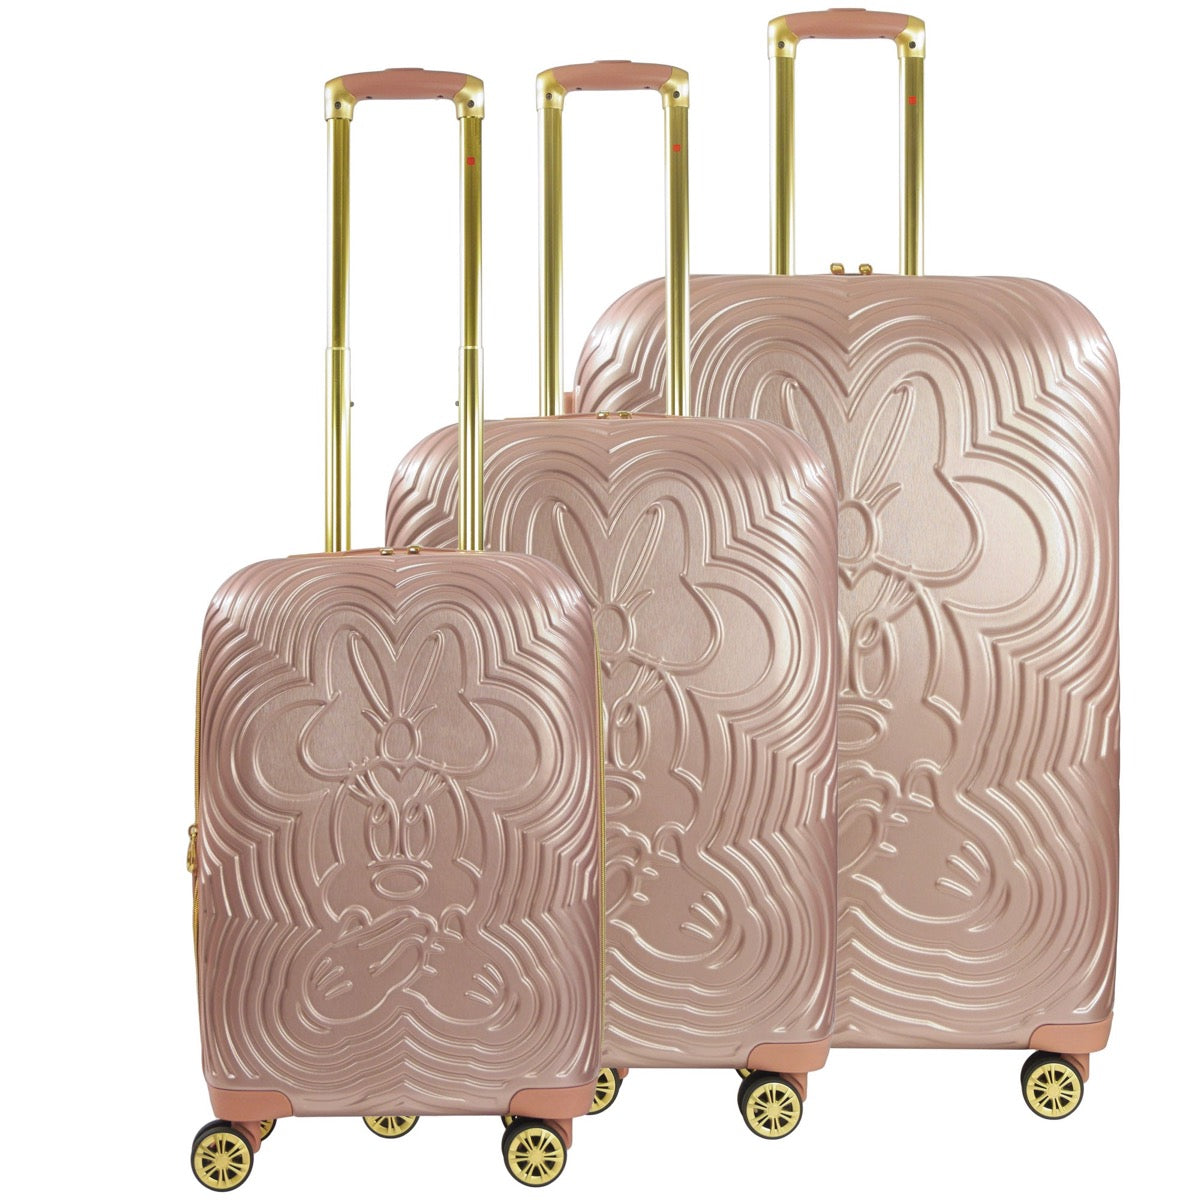 Disney Fūl Playful Minnie Mouse piece spinner suitcase Ful luggage set hard sided rose gold